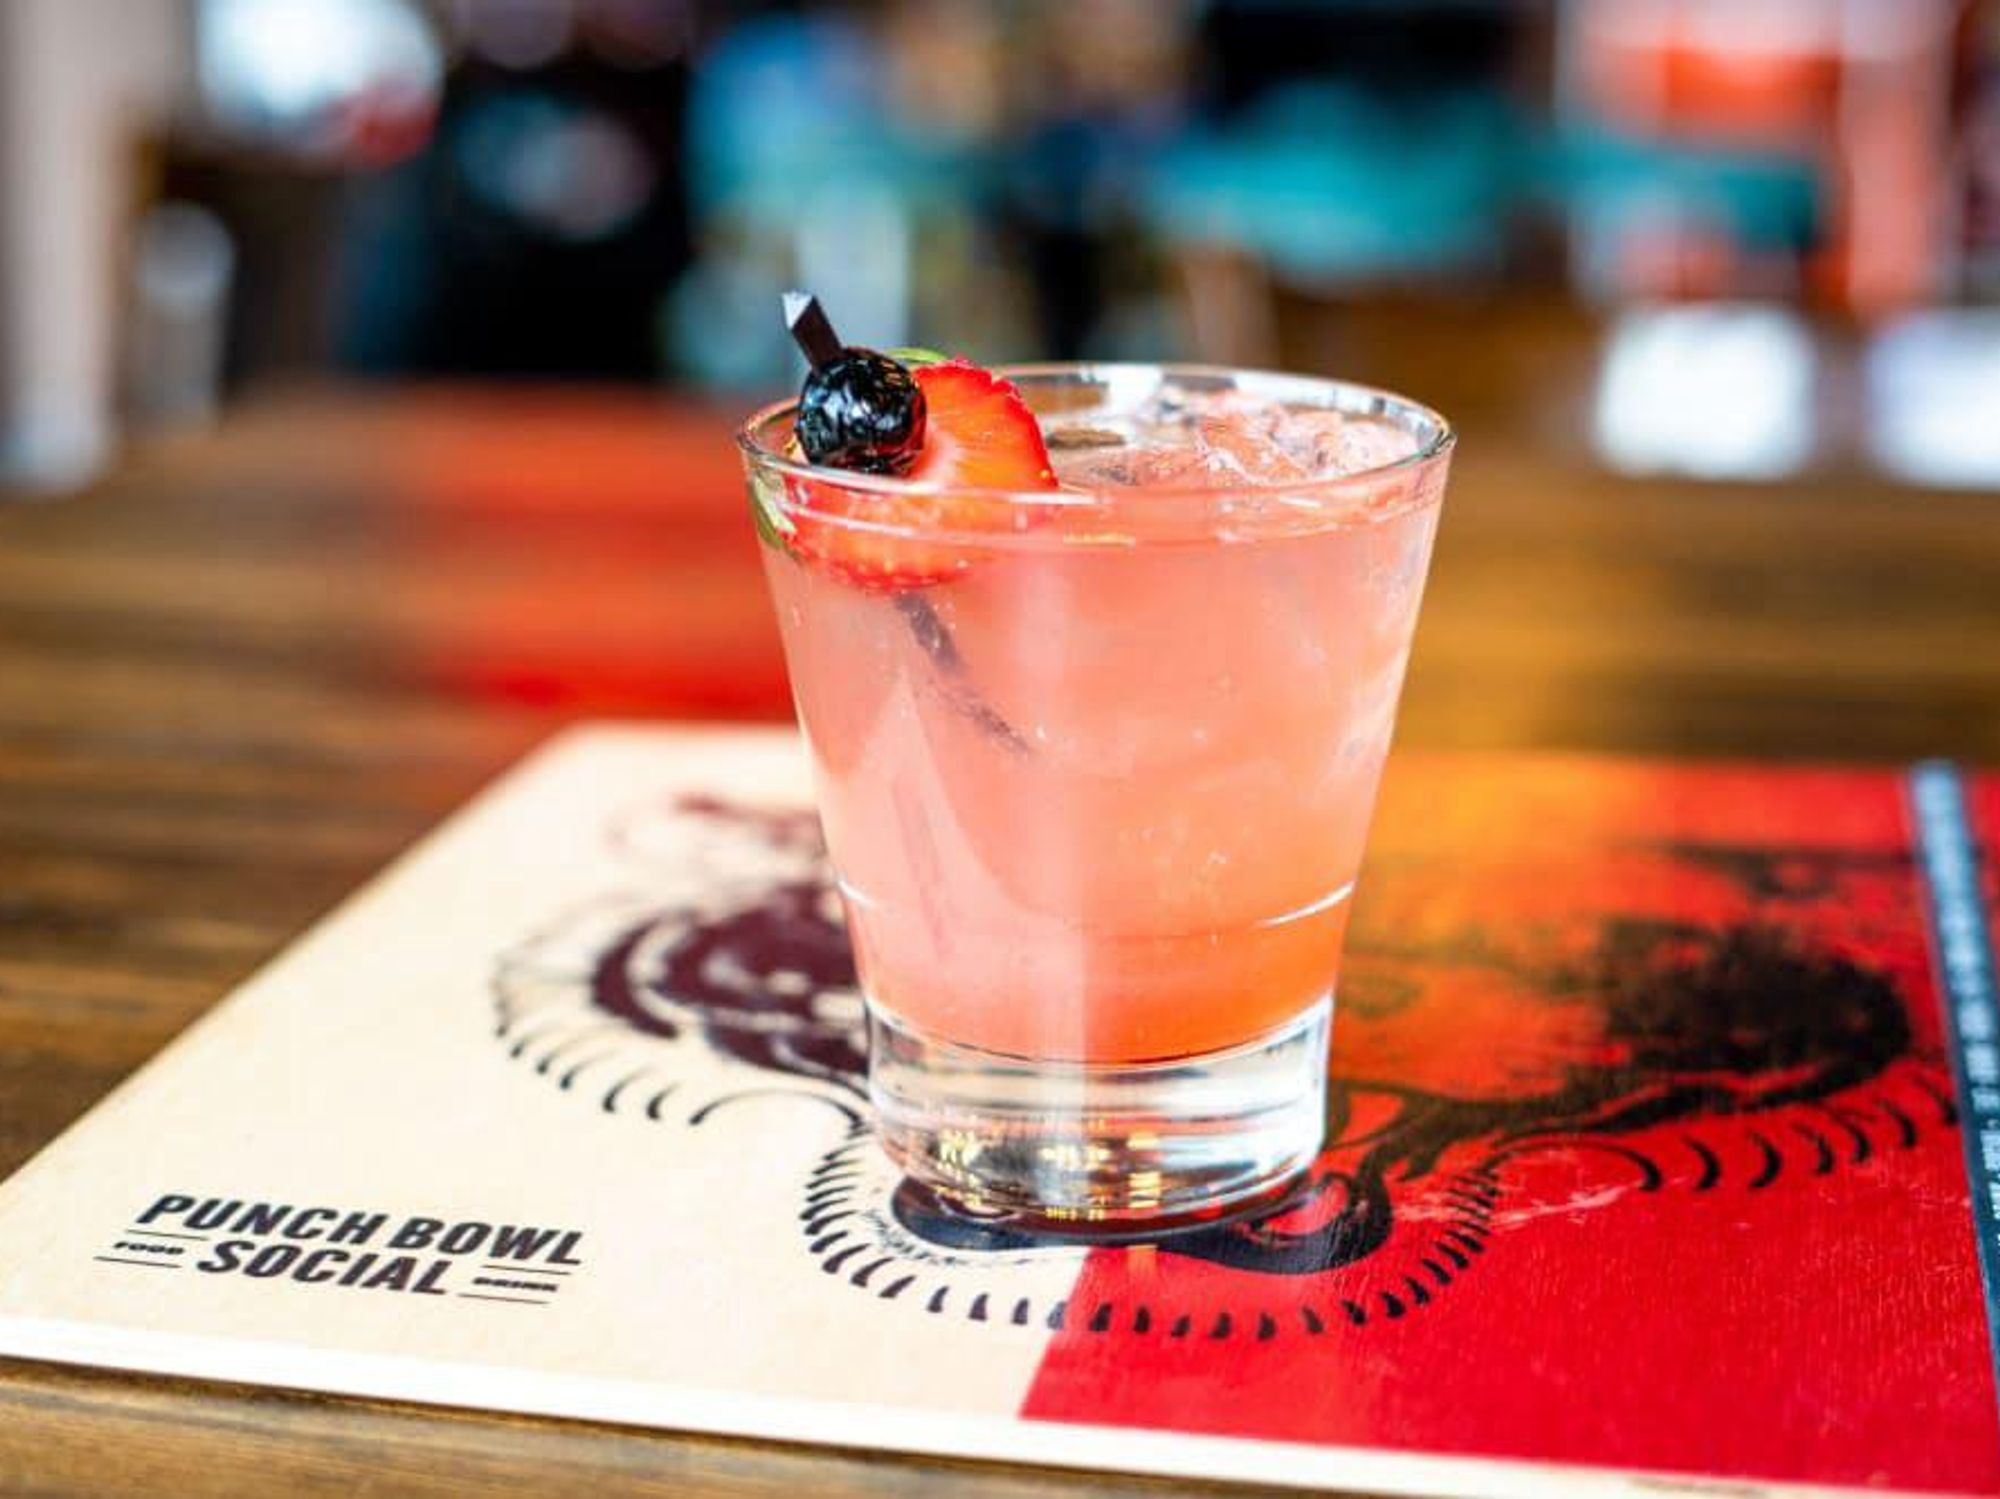 A pink punch with a strawberry garnish by Punch Bowl Social.